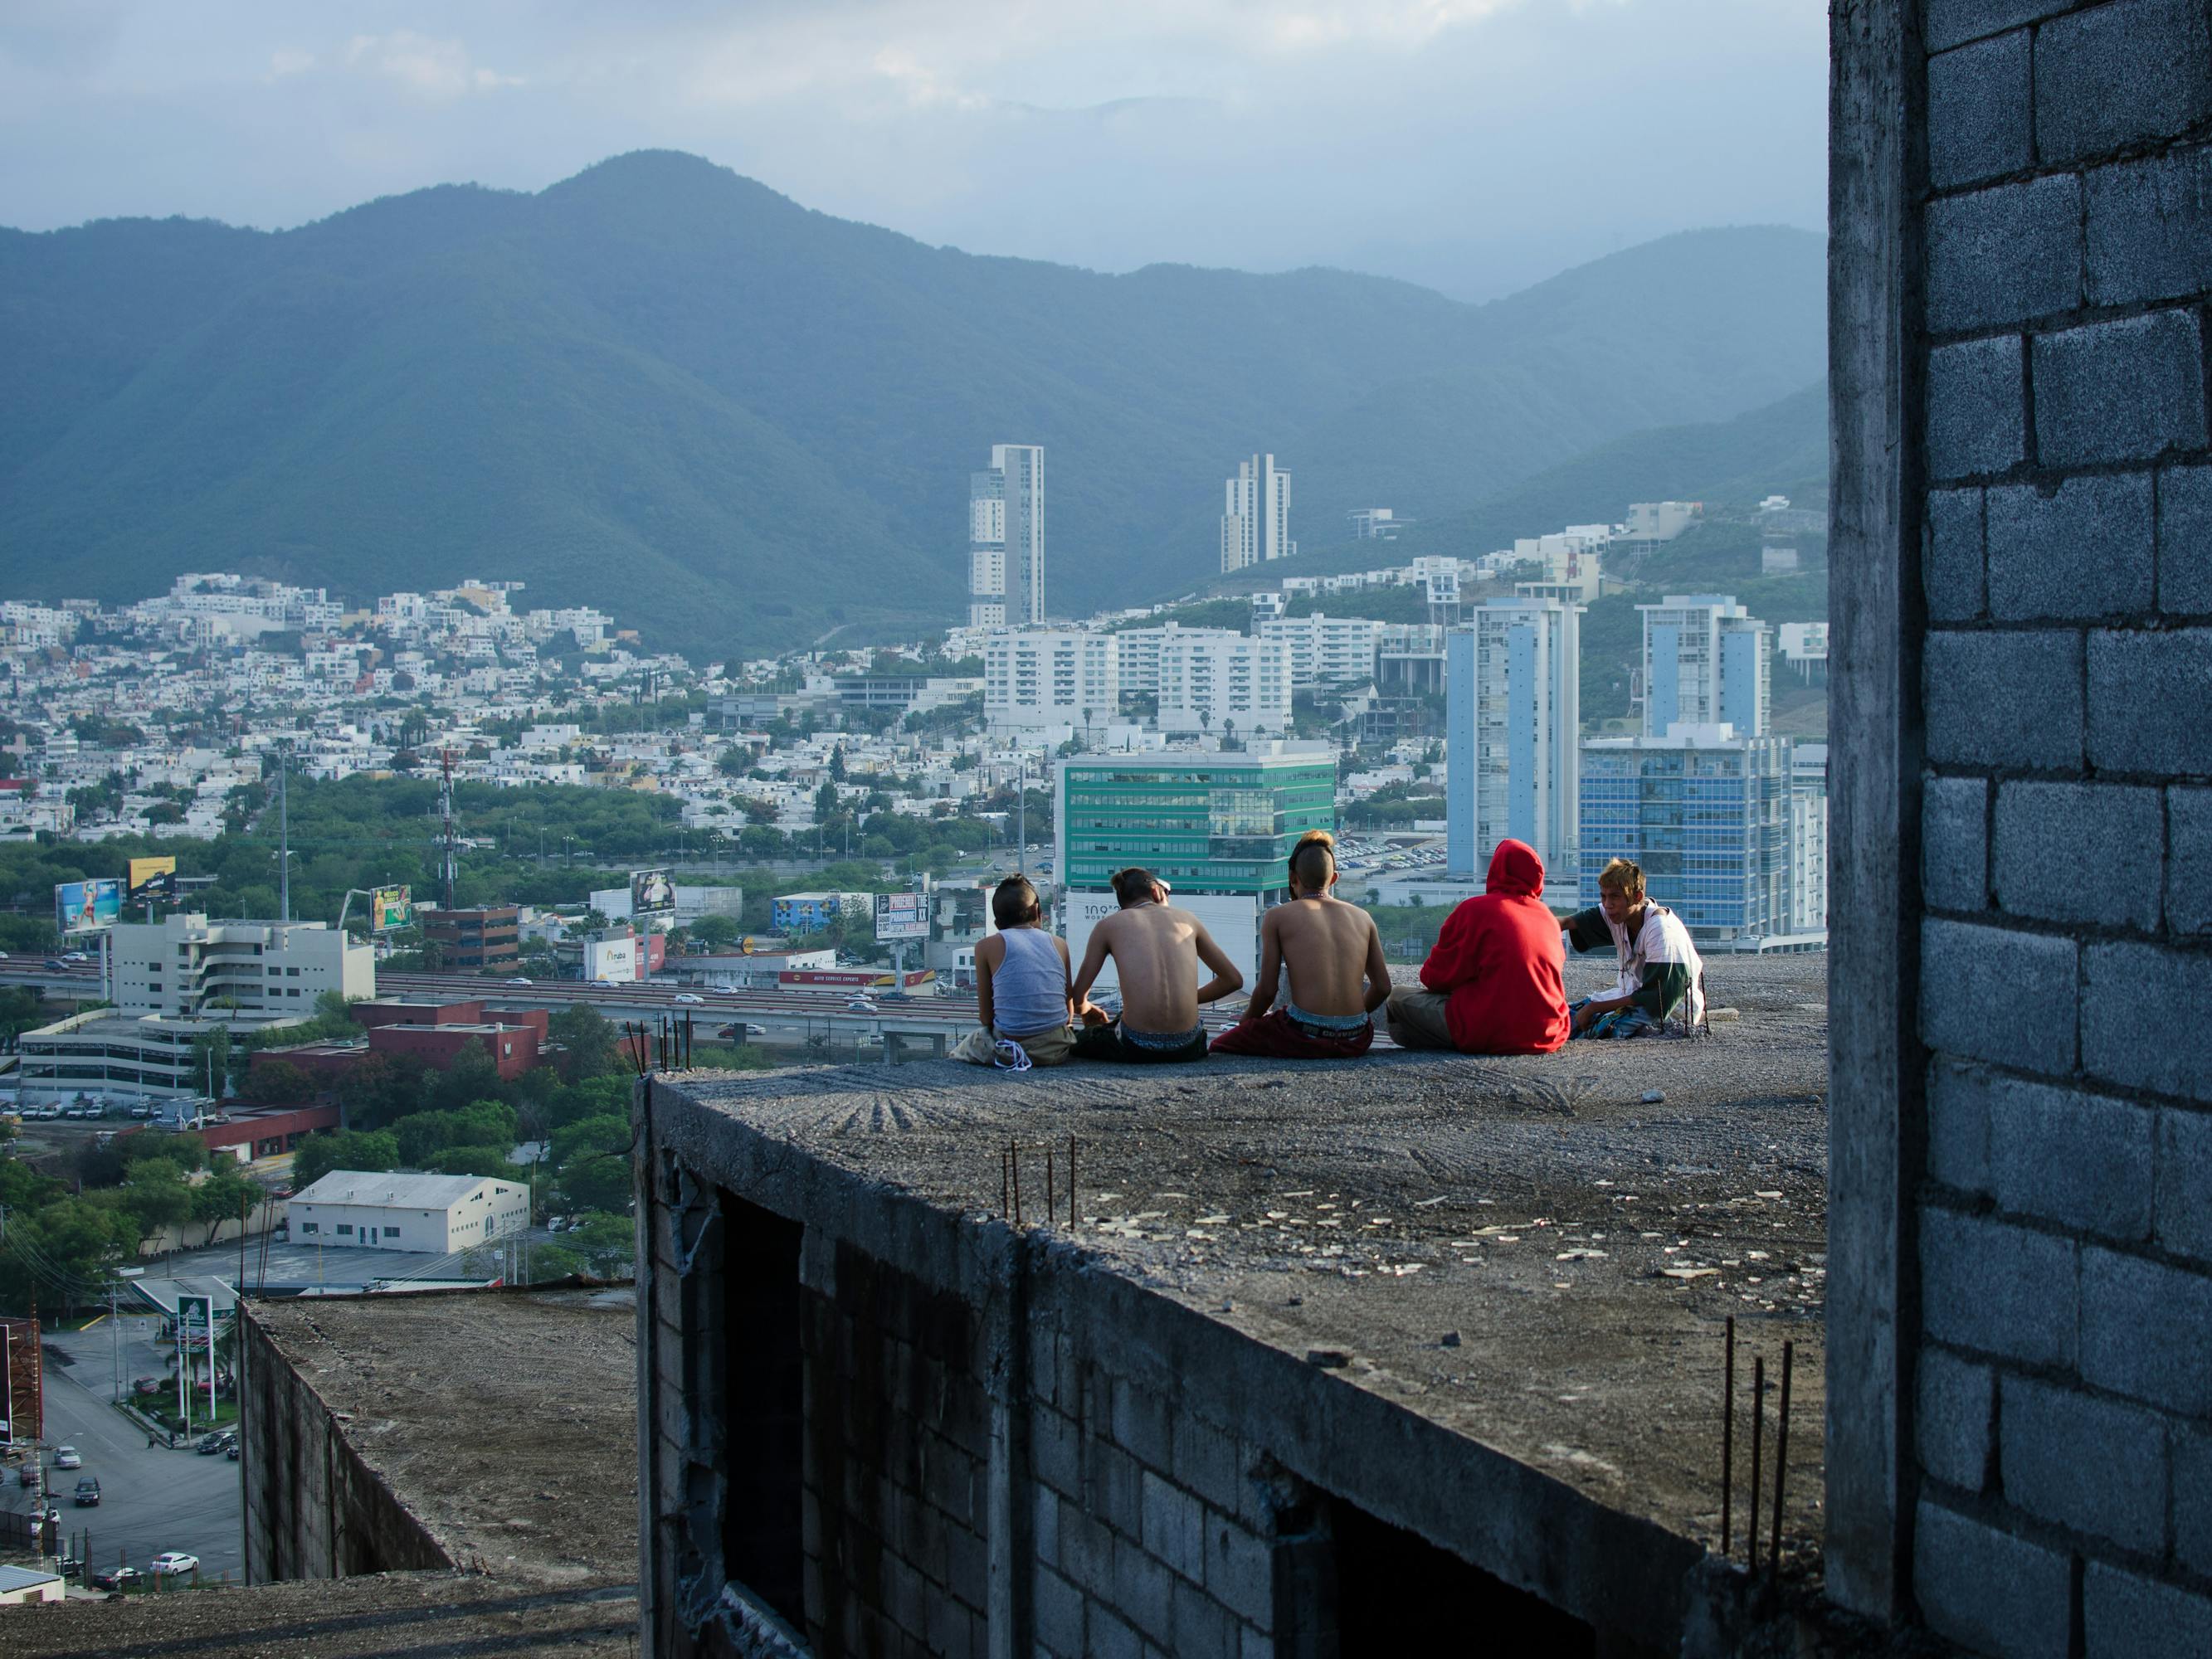 Characters from Ya no estoy aquí sit on the edge of a building overlooking a city.